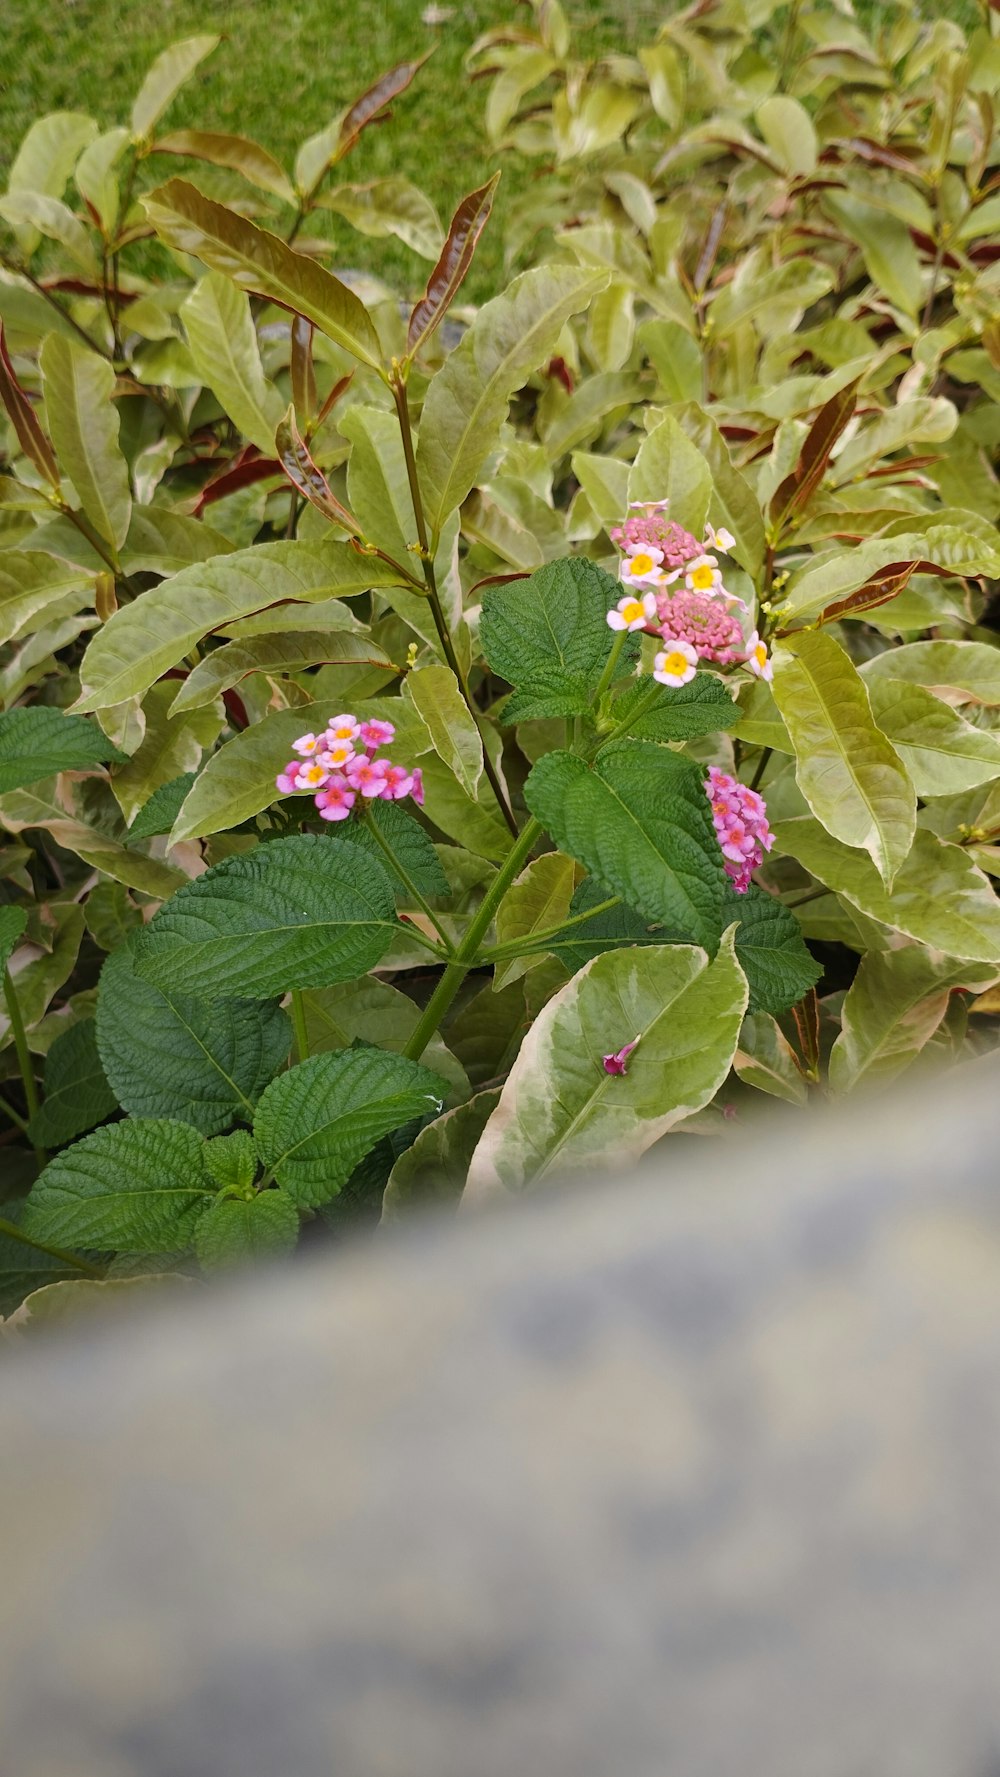 a group of plants with pink and yellow flowers